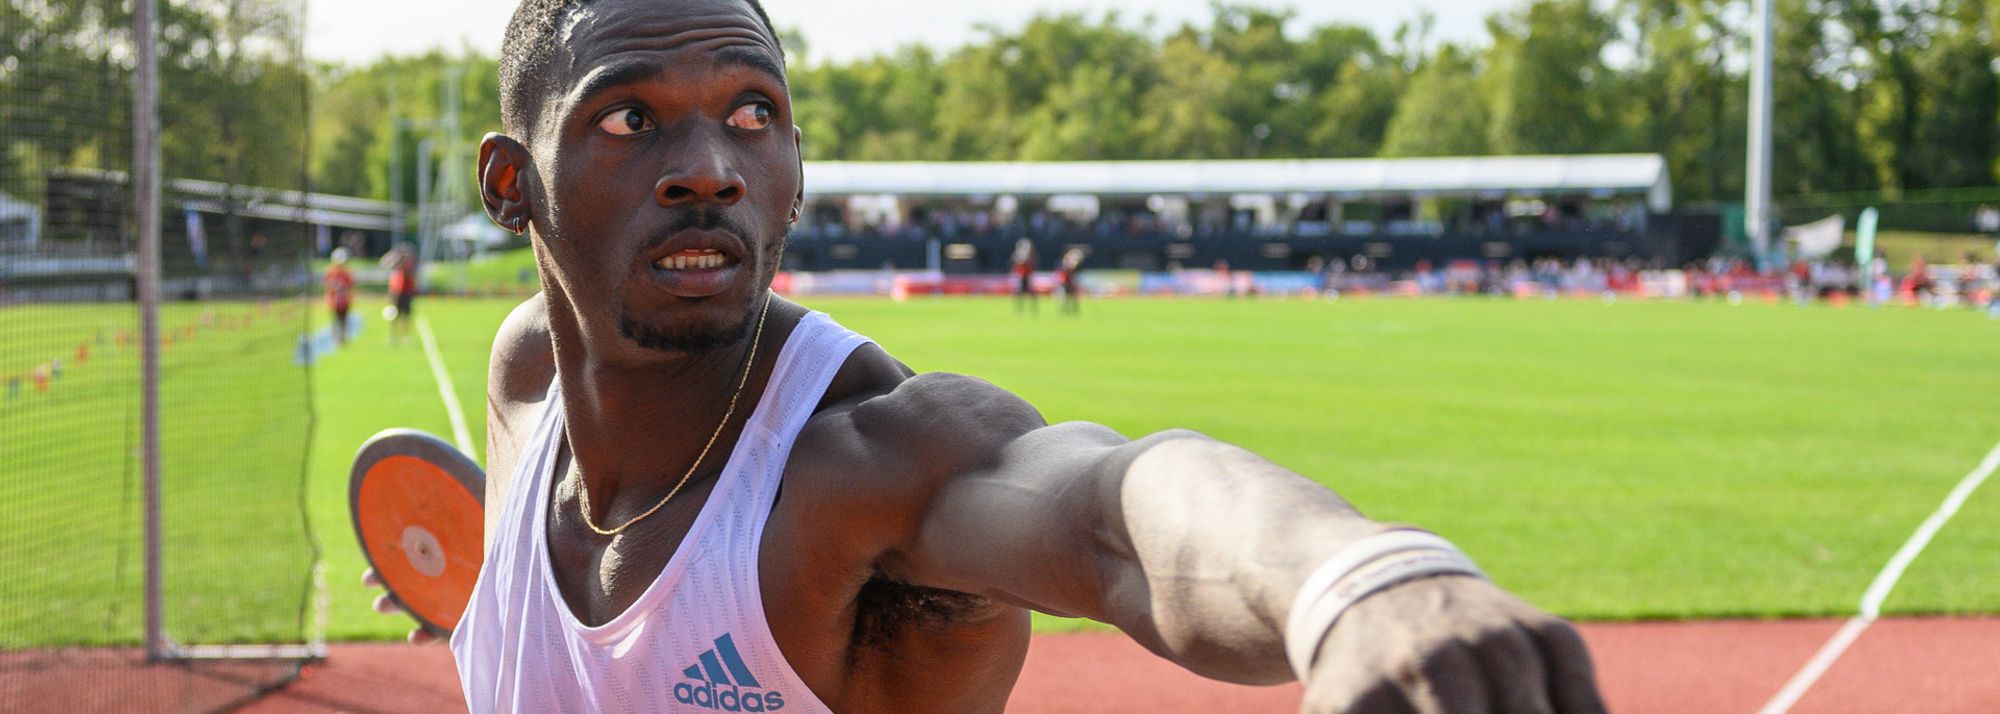 Global bronze medallists Lindon Victor and Emma Oosterwegel return to defend their titles at this season’s final World Athletics Combined Events Tour Gold meeting